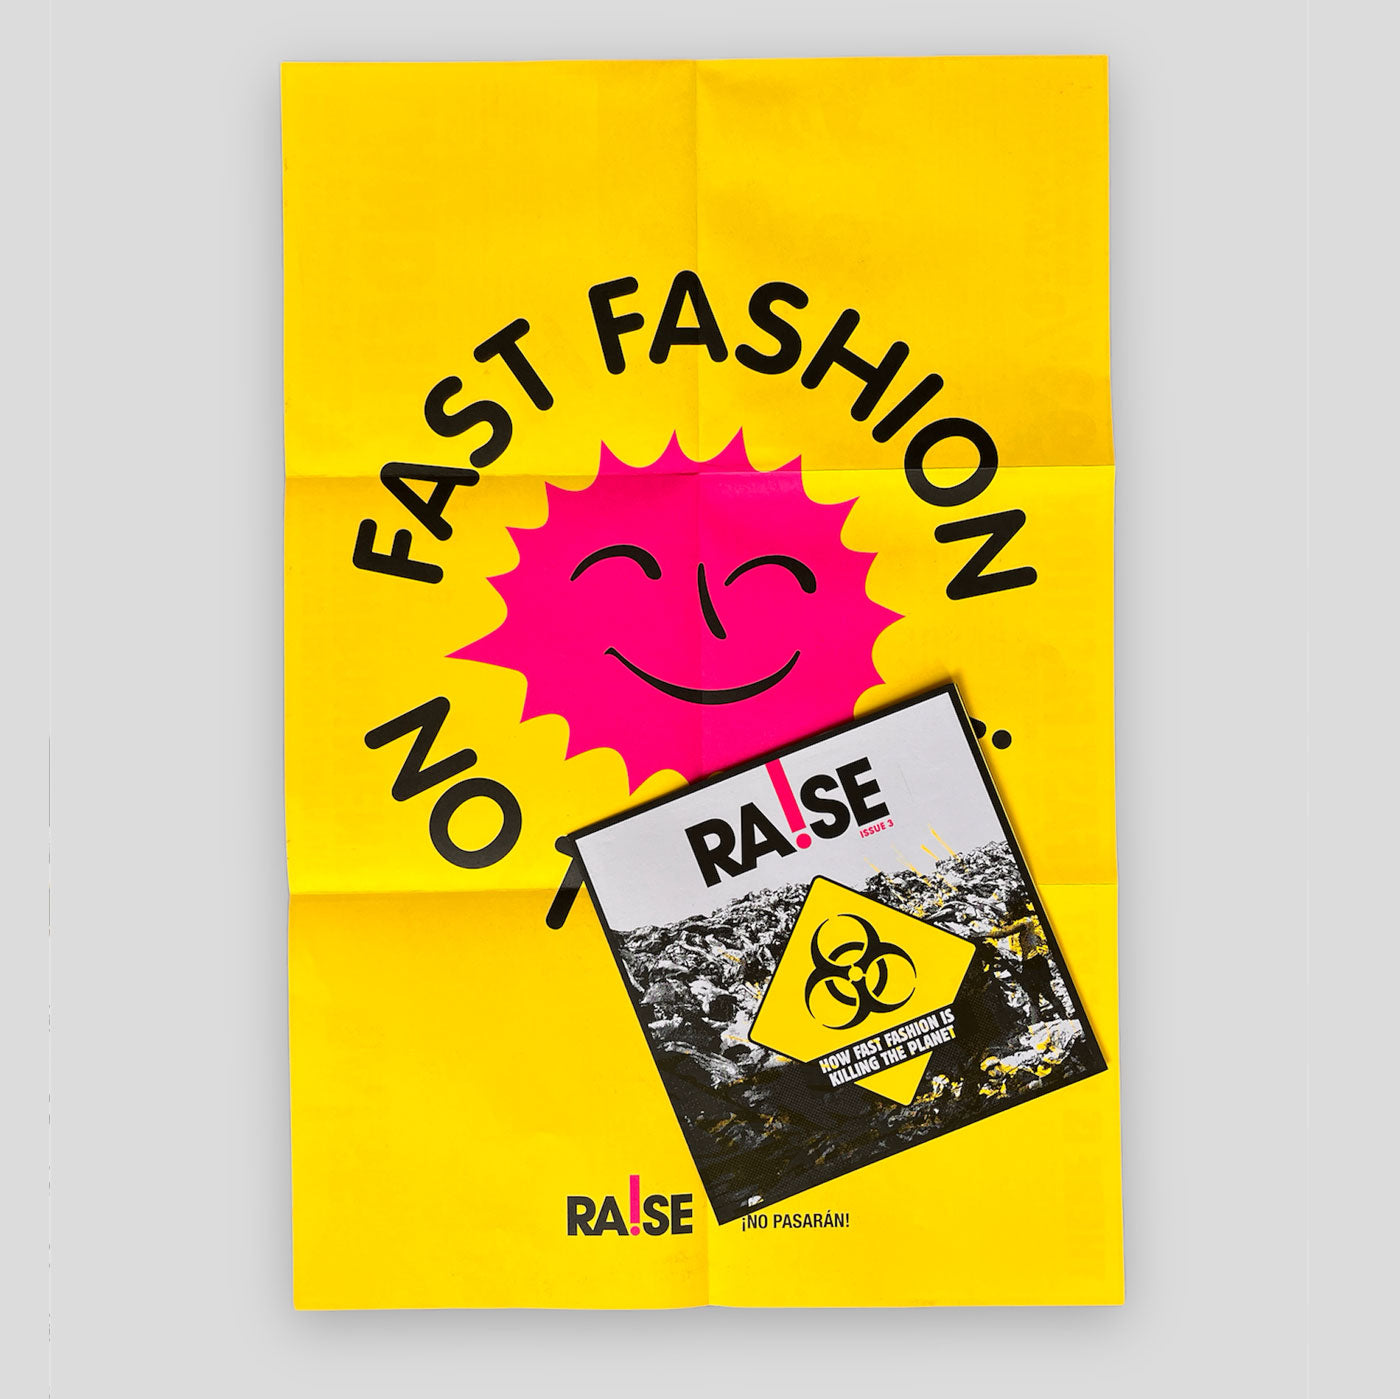 Ra!se #3 | How Fast Fashion is Killing The Planet